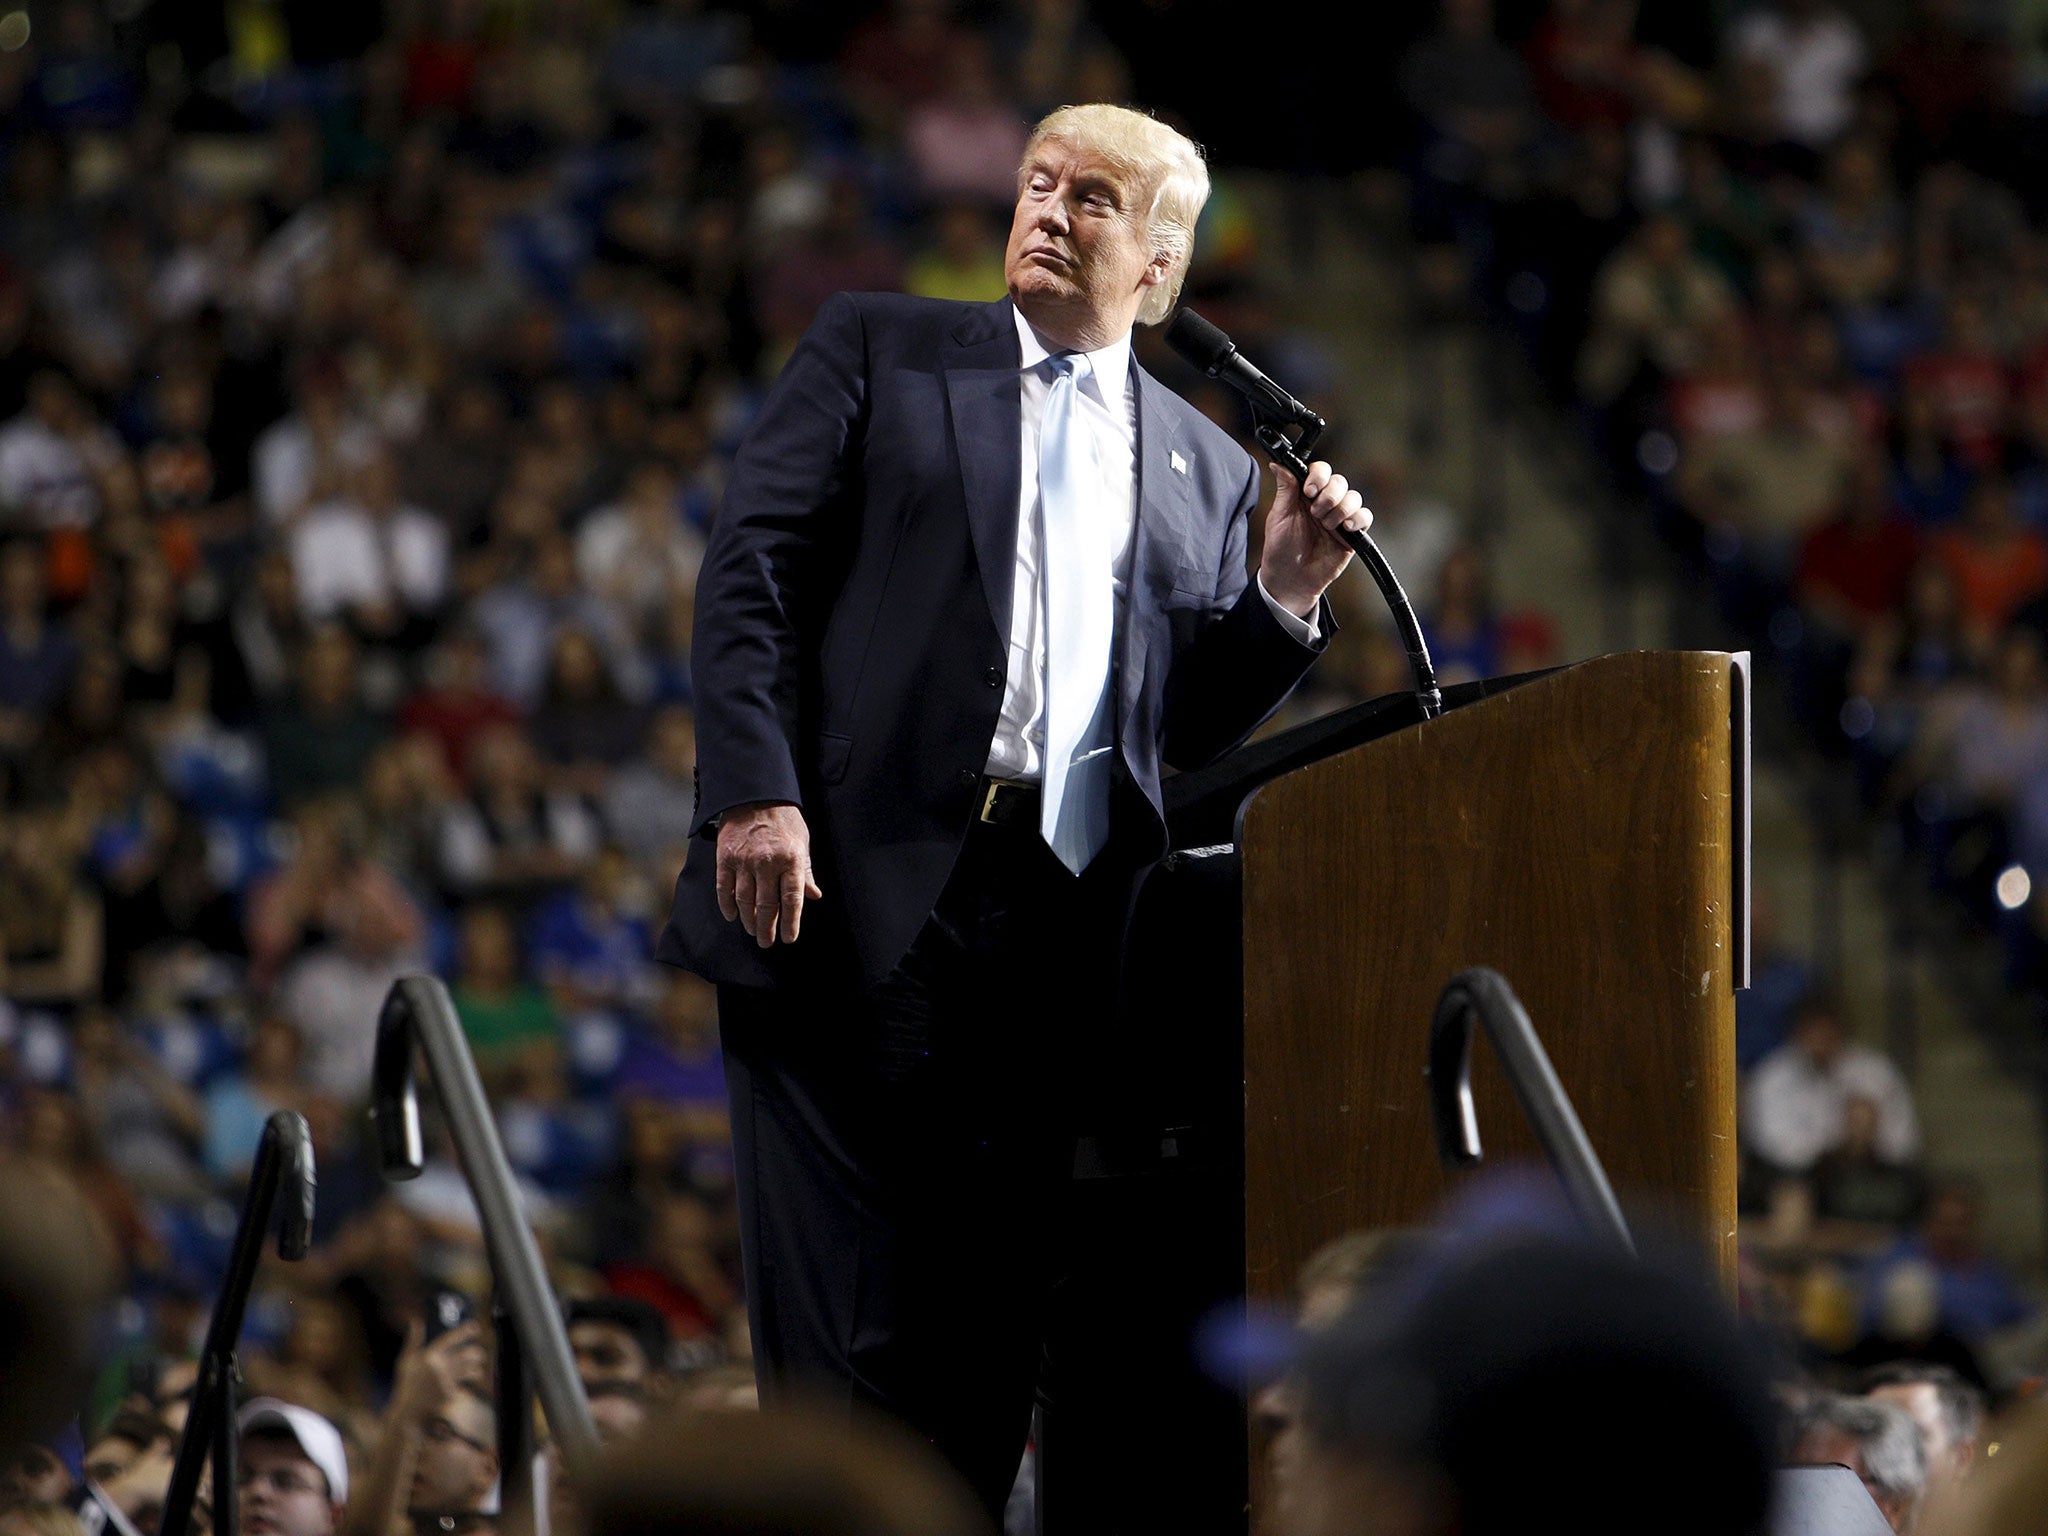 Donald Trump speaks at the rally in Fayetteville, North Carolina